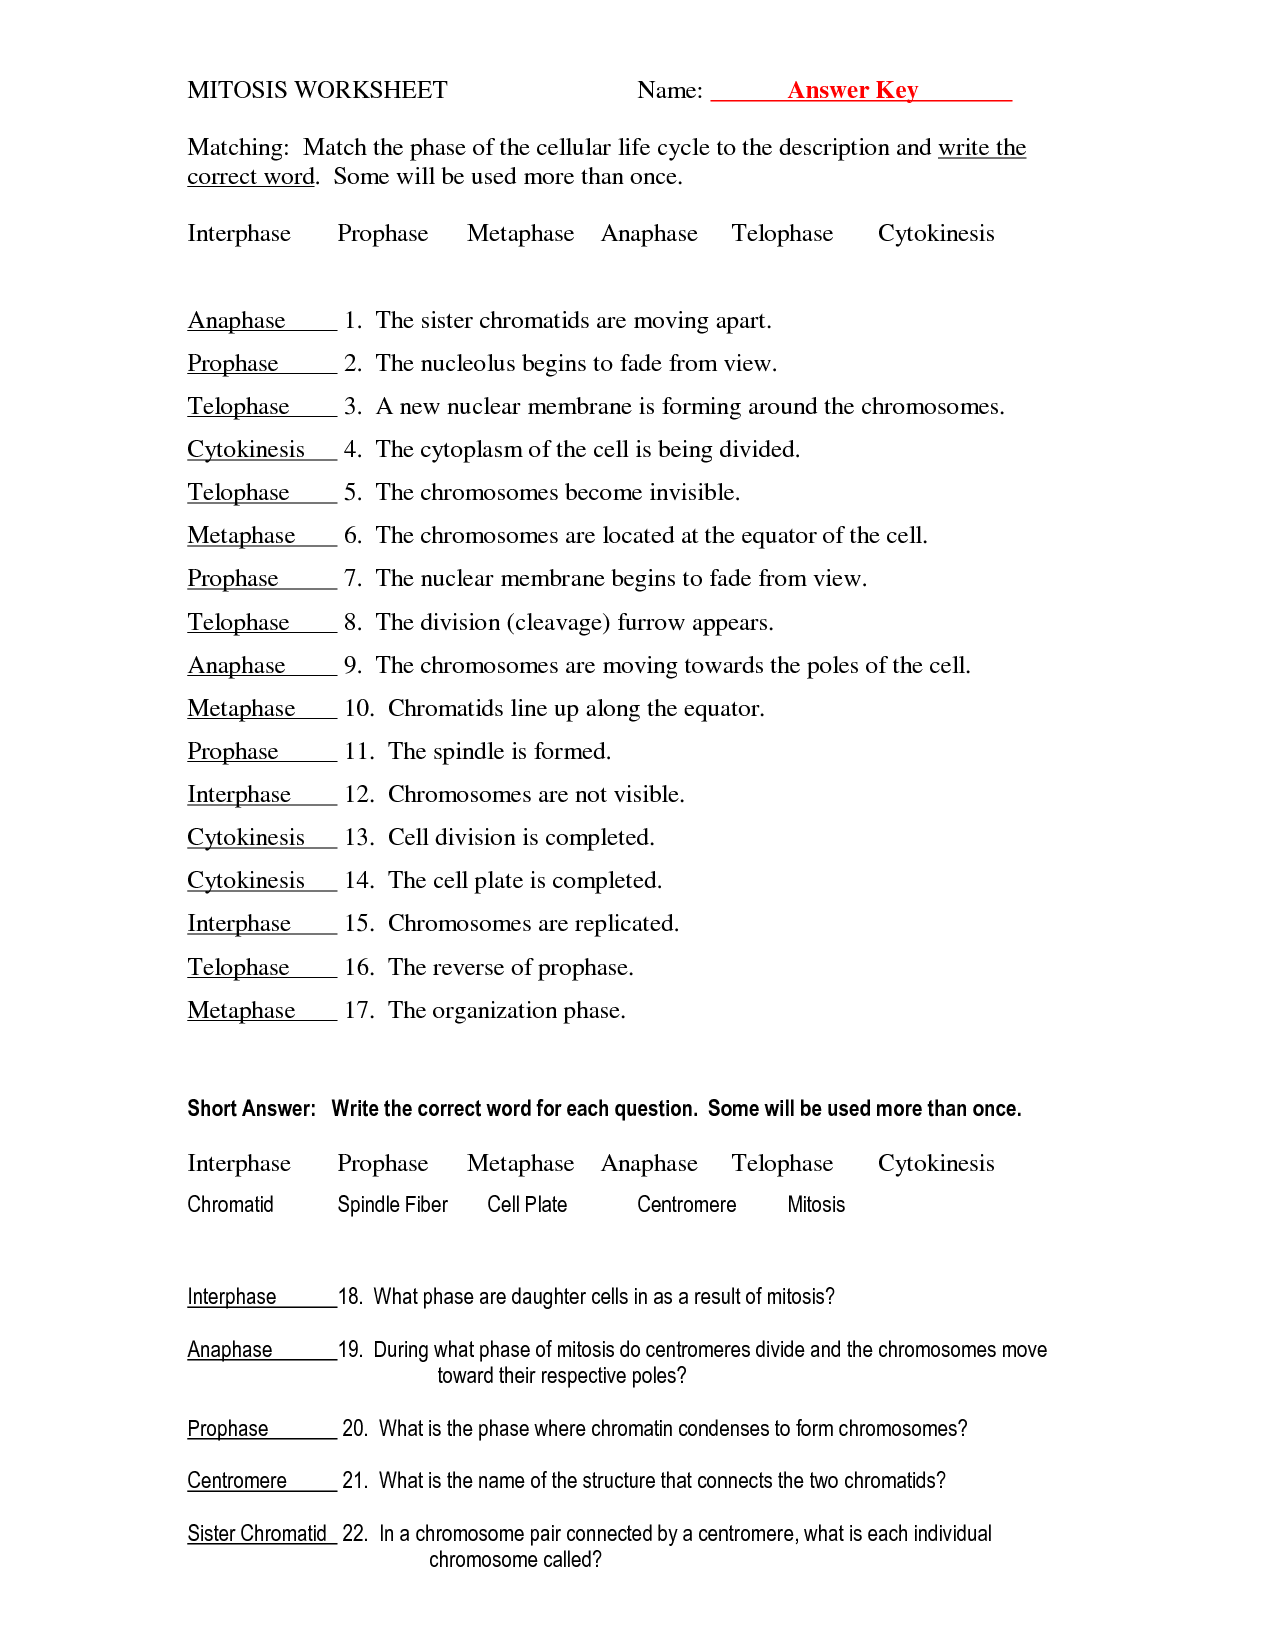 15 Best Images of Meiosis Stages Worksheet Answers - Meiosis Matching